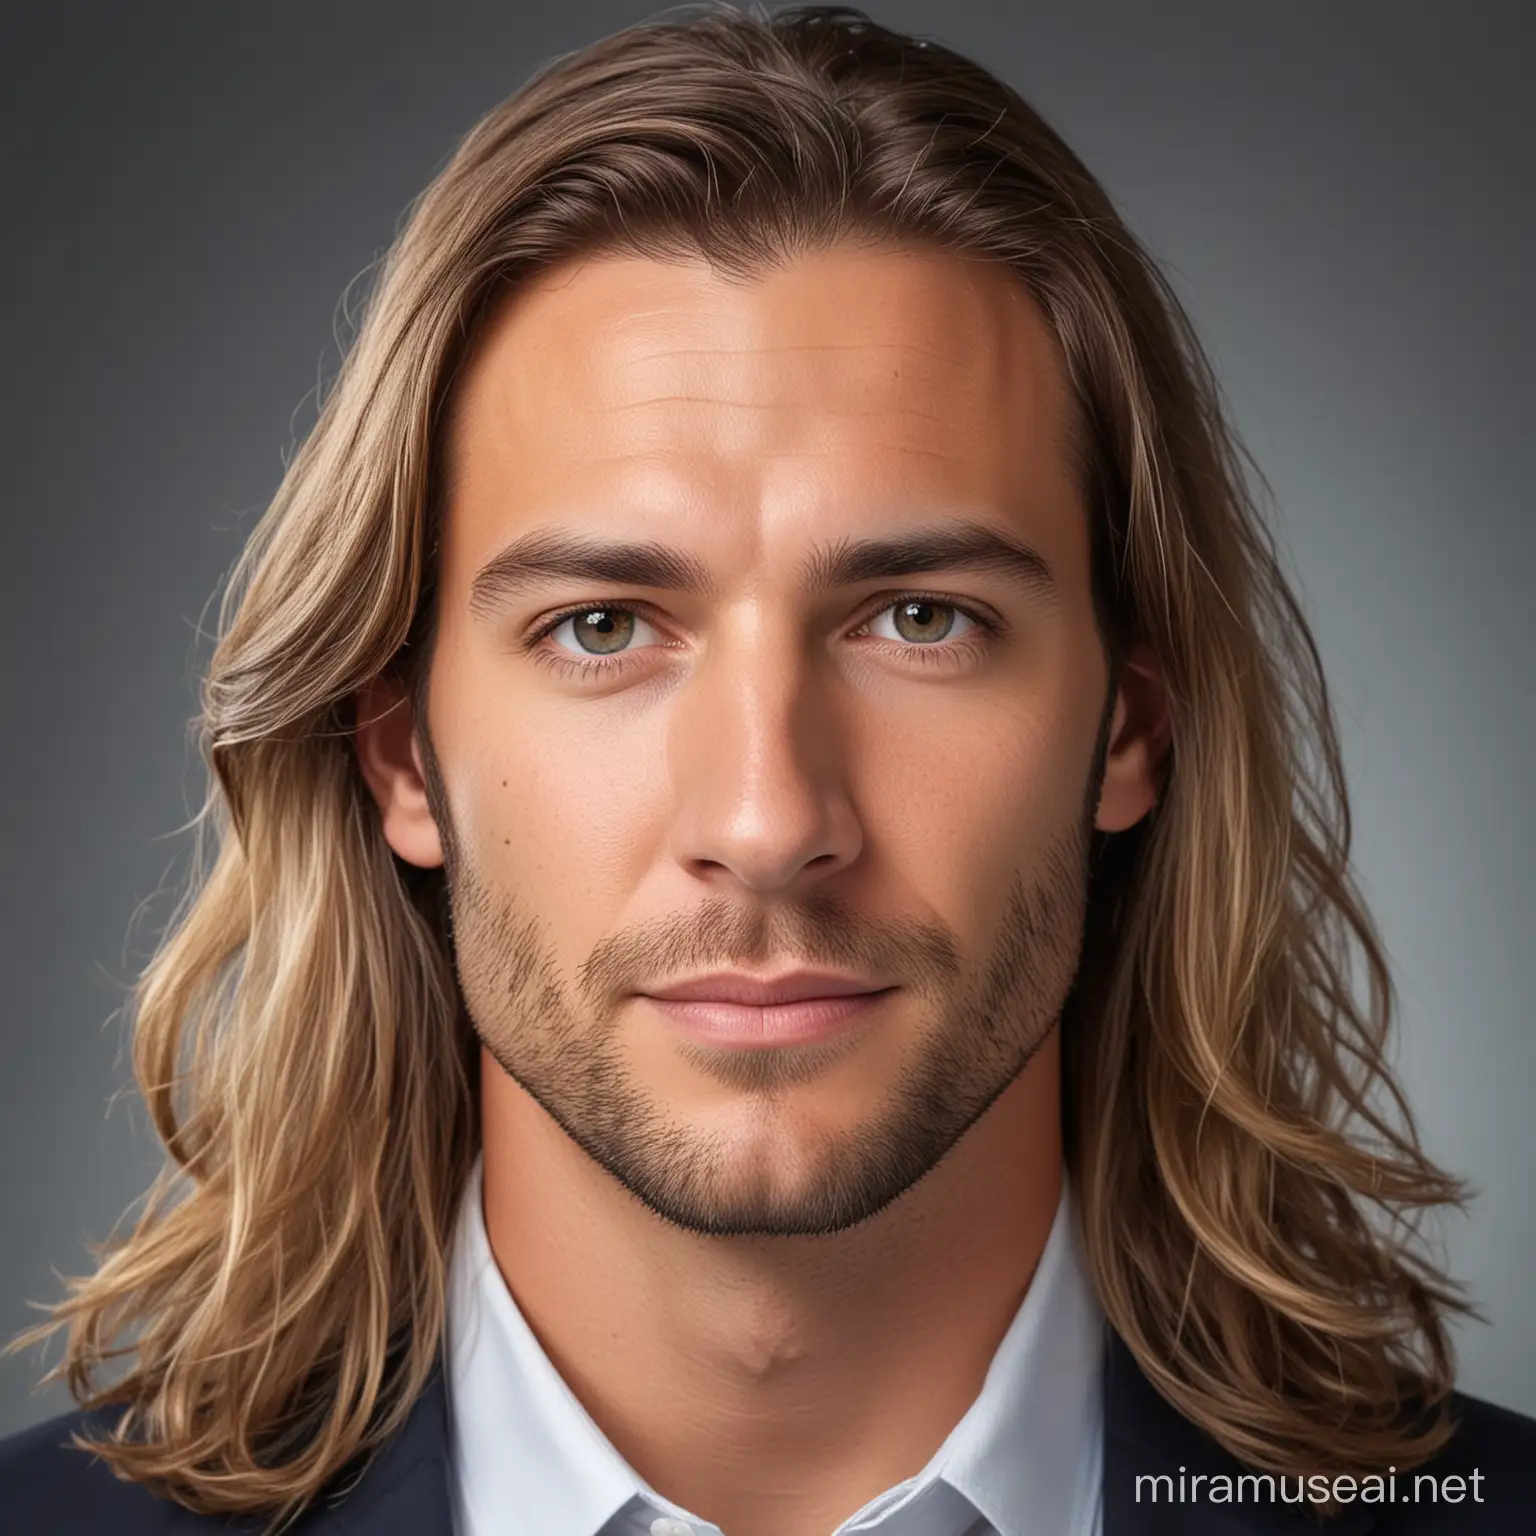 generate a professional headshot for a man with long hair